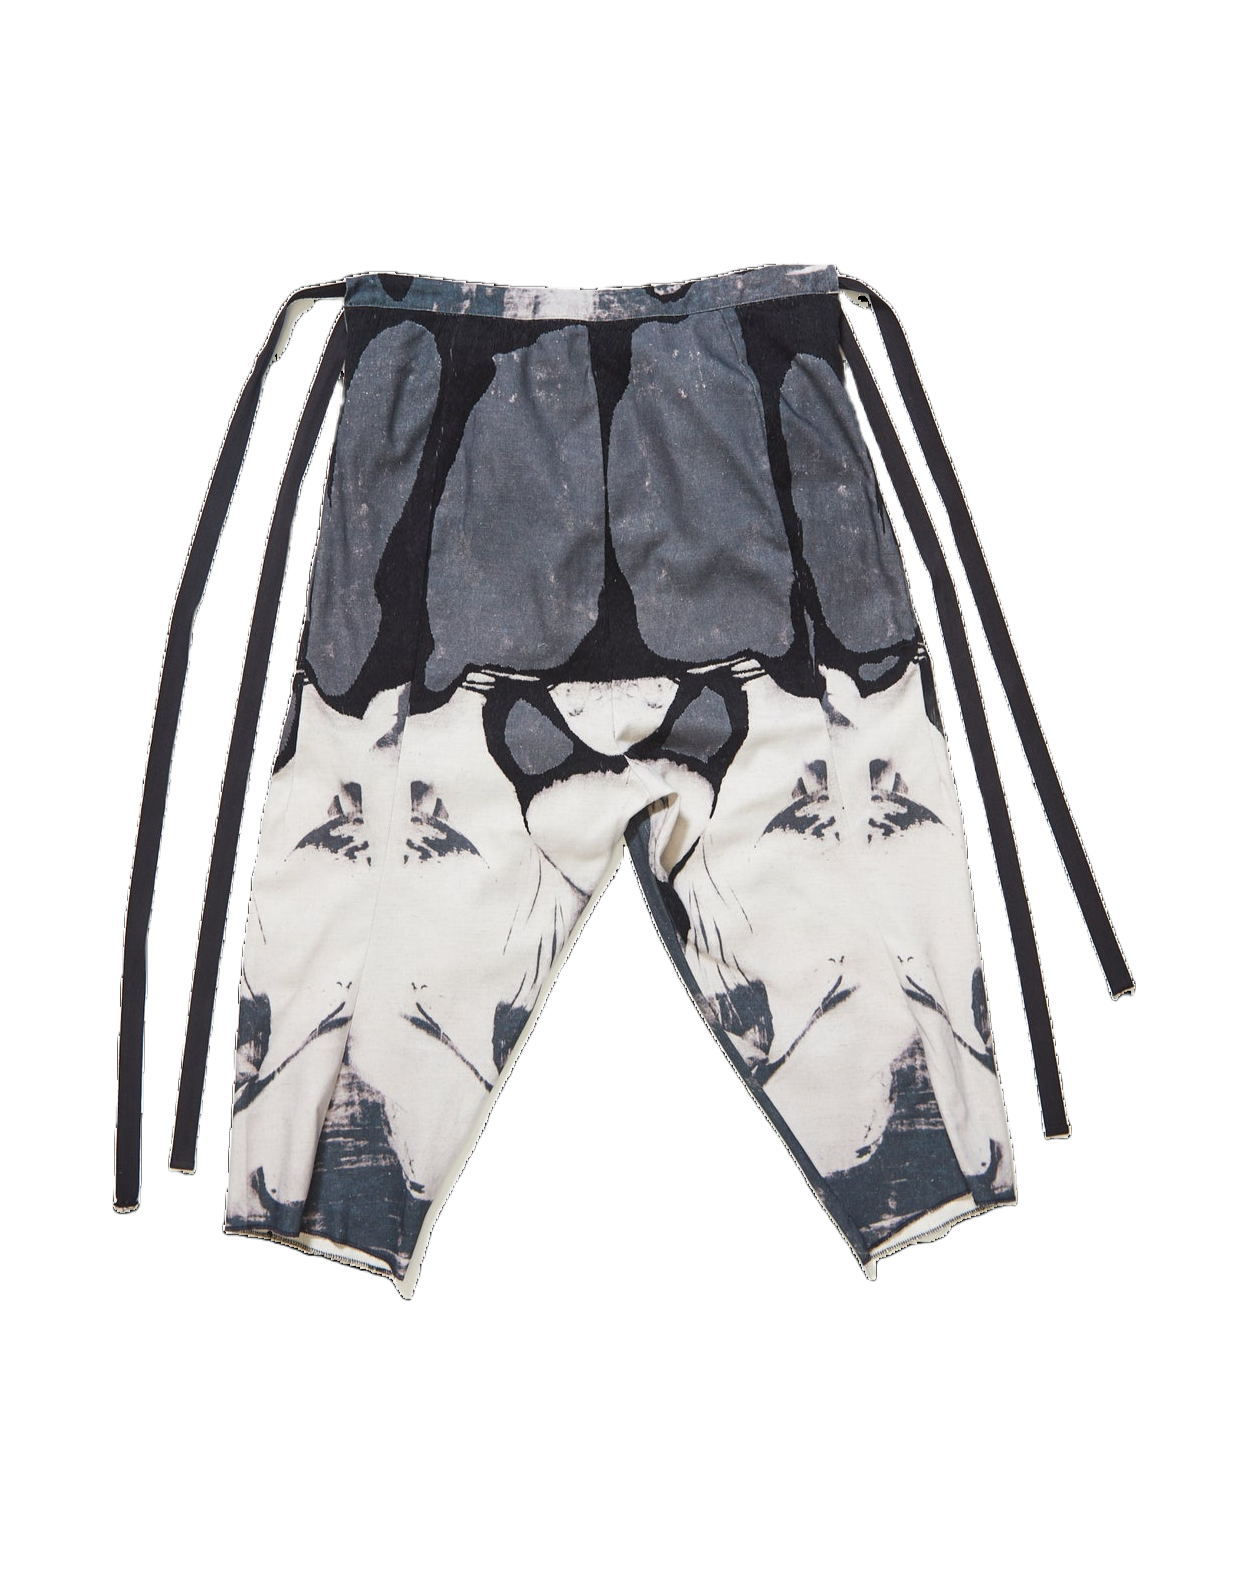 Side Tie Drop Shorts in Black and White Digital "Holubiyi" Print collaboration by Holly Vaughan's print series "Siren"